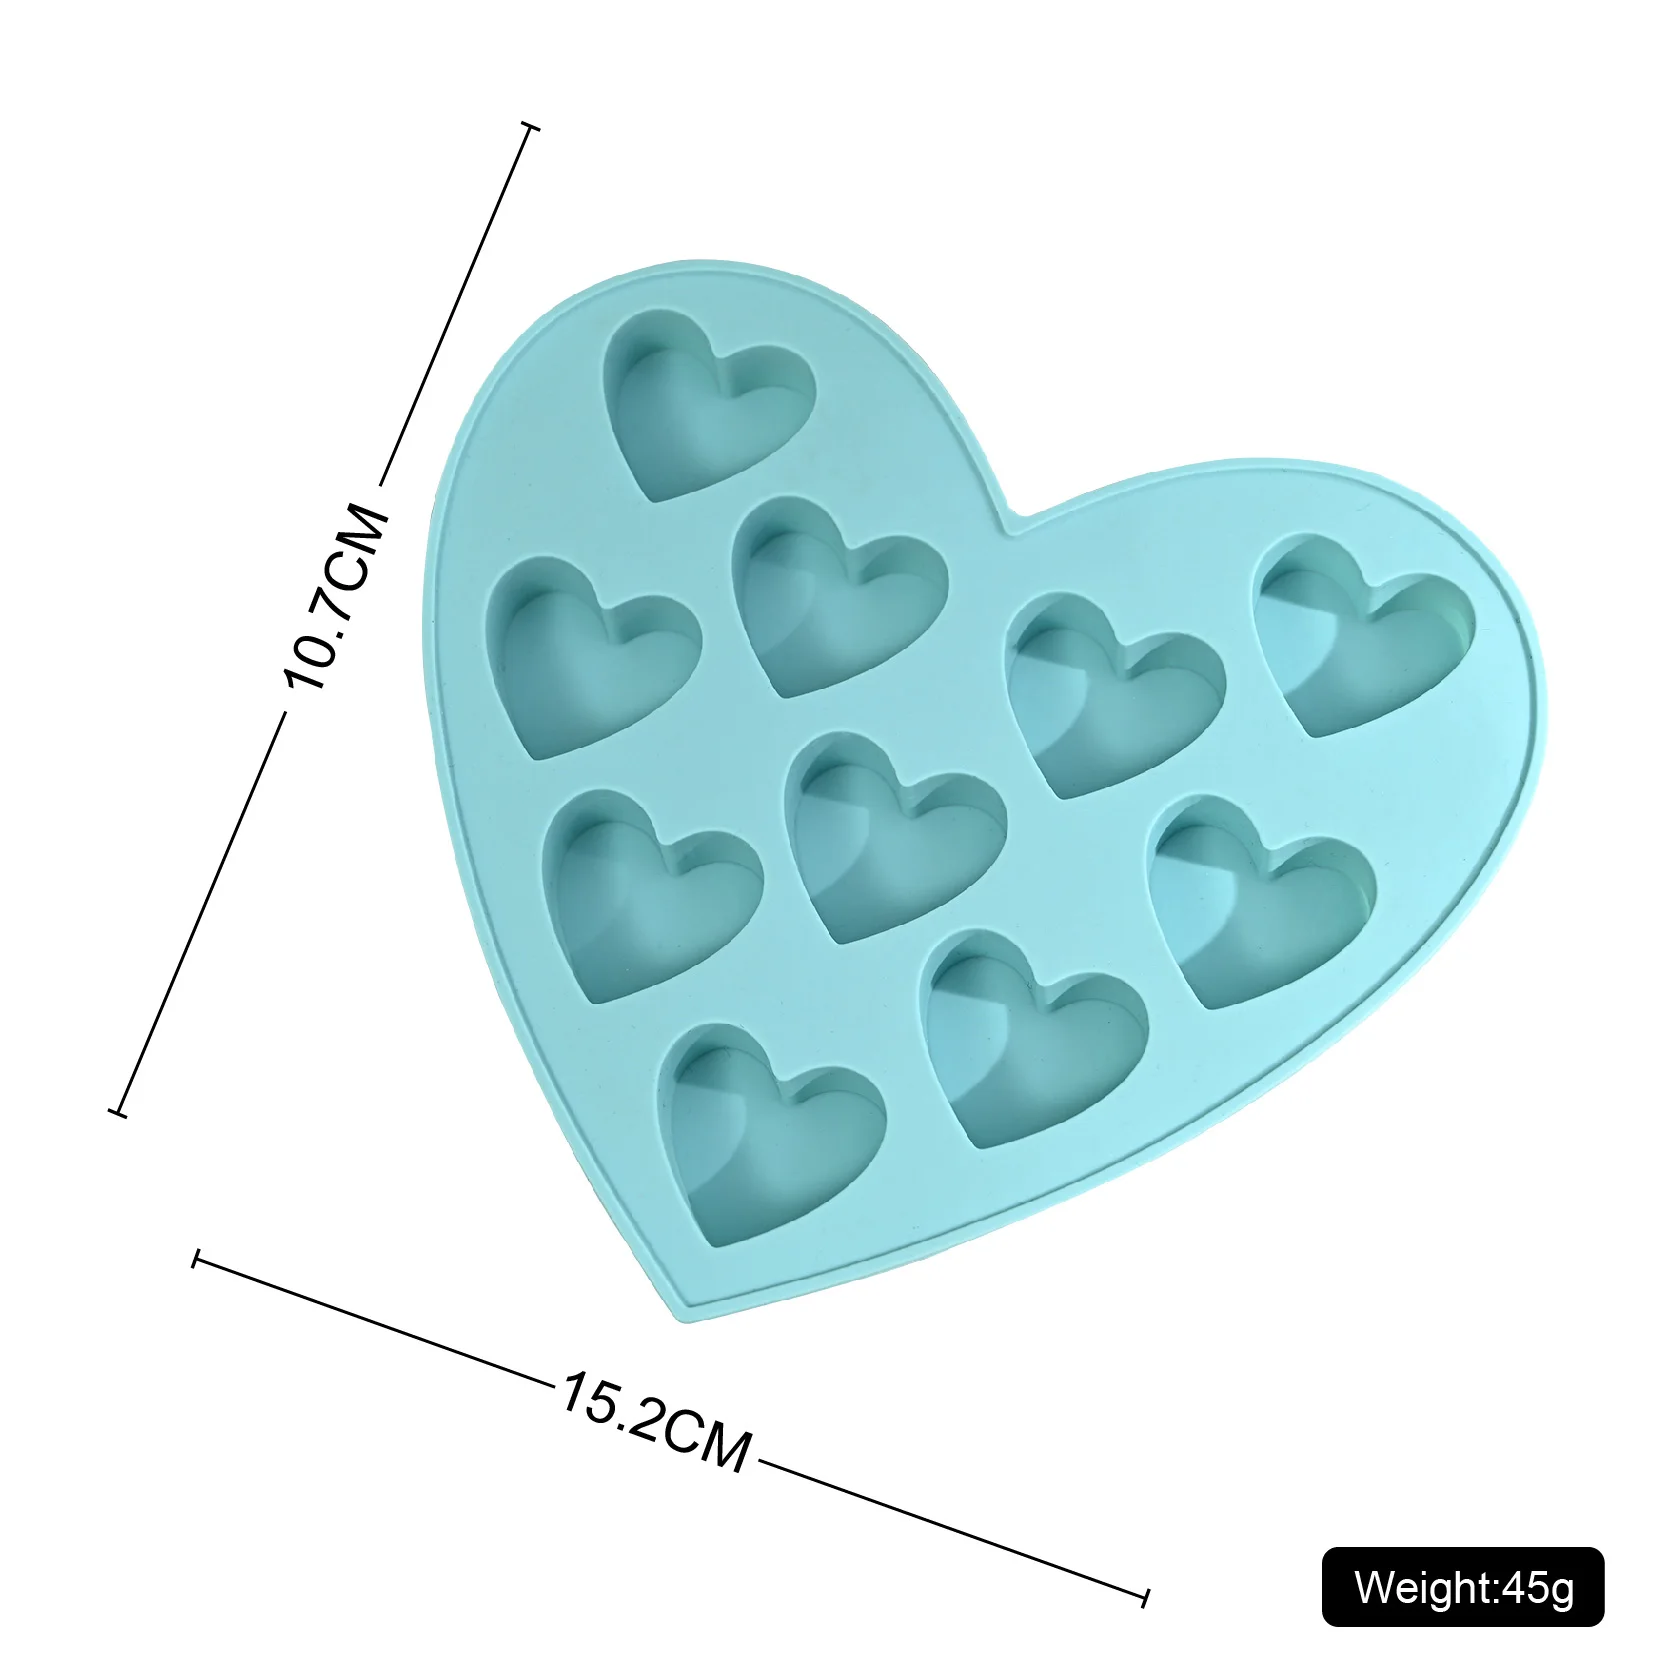 In Stock 10 Even Love Heart Silicone Chocolate Mold Valentine Diamond Heart Shaped Cake Mold